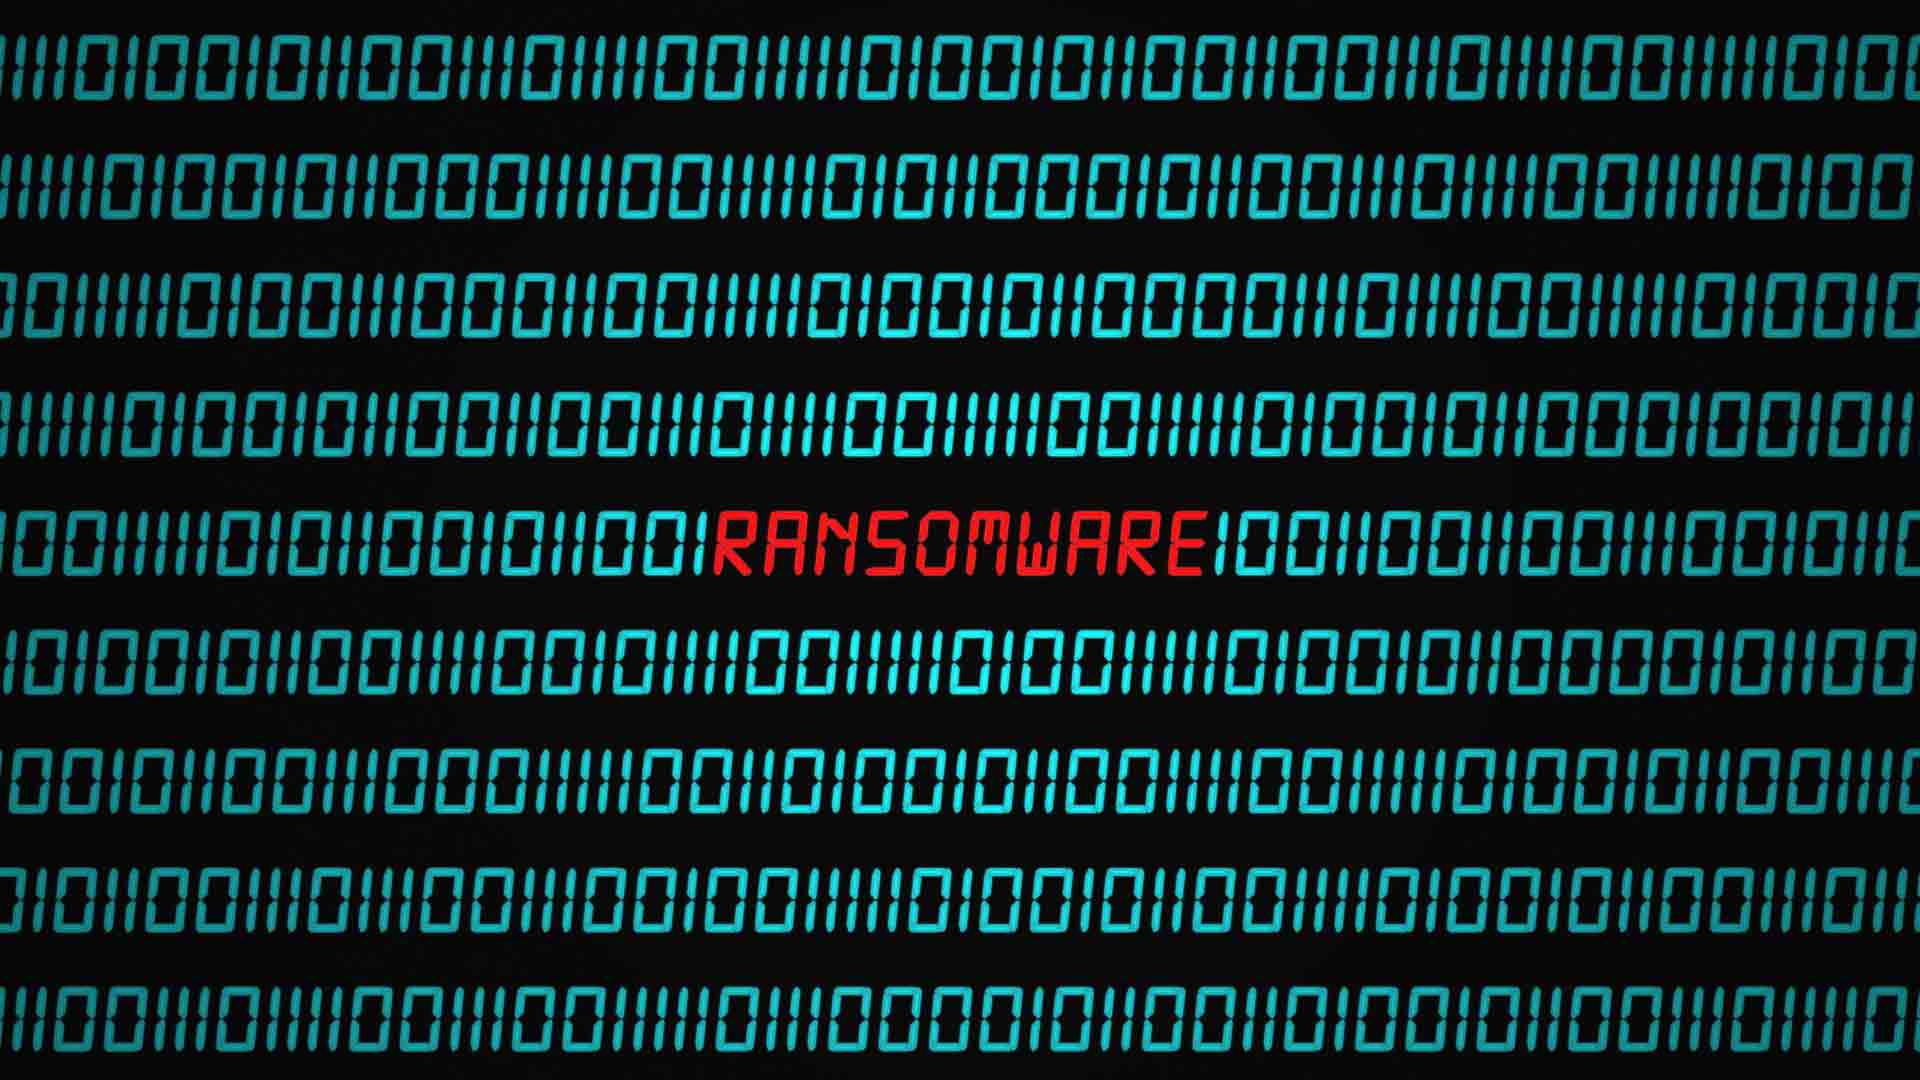 4 Tips for Protecting Your Business from Ransomware Attacks